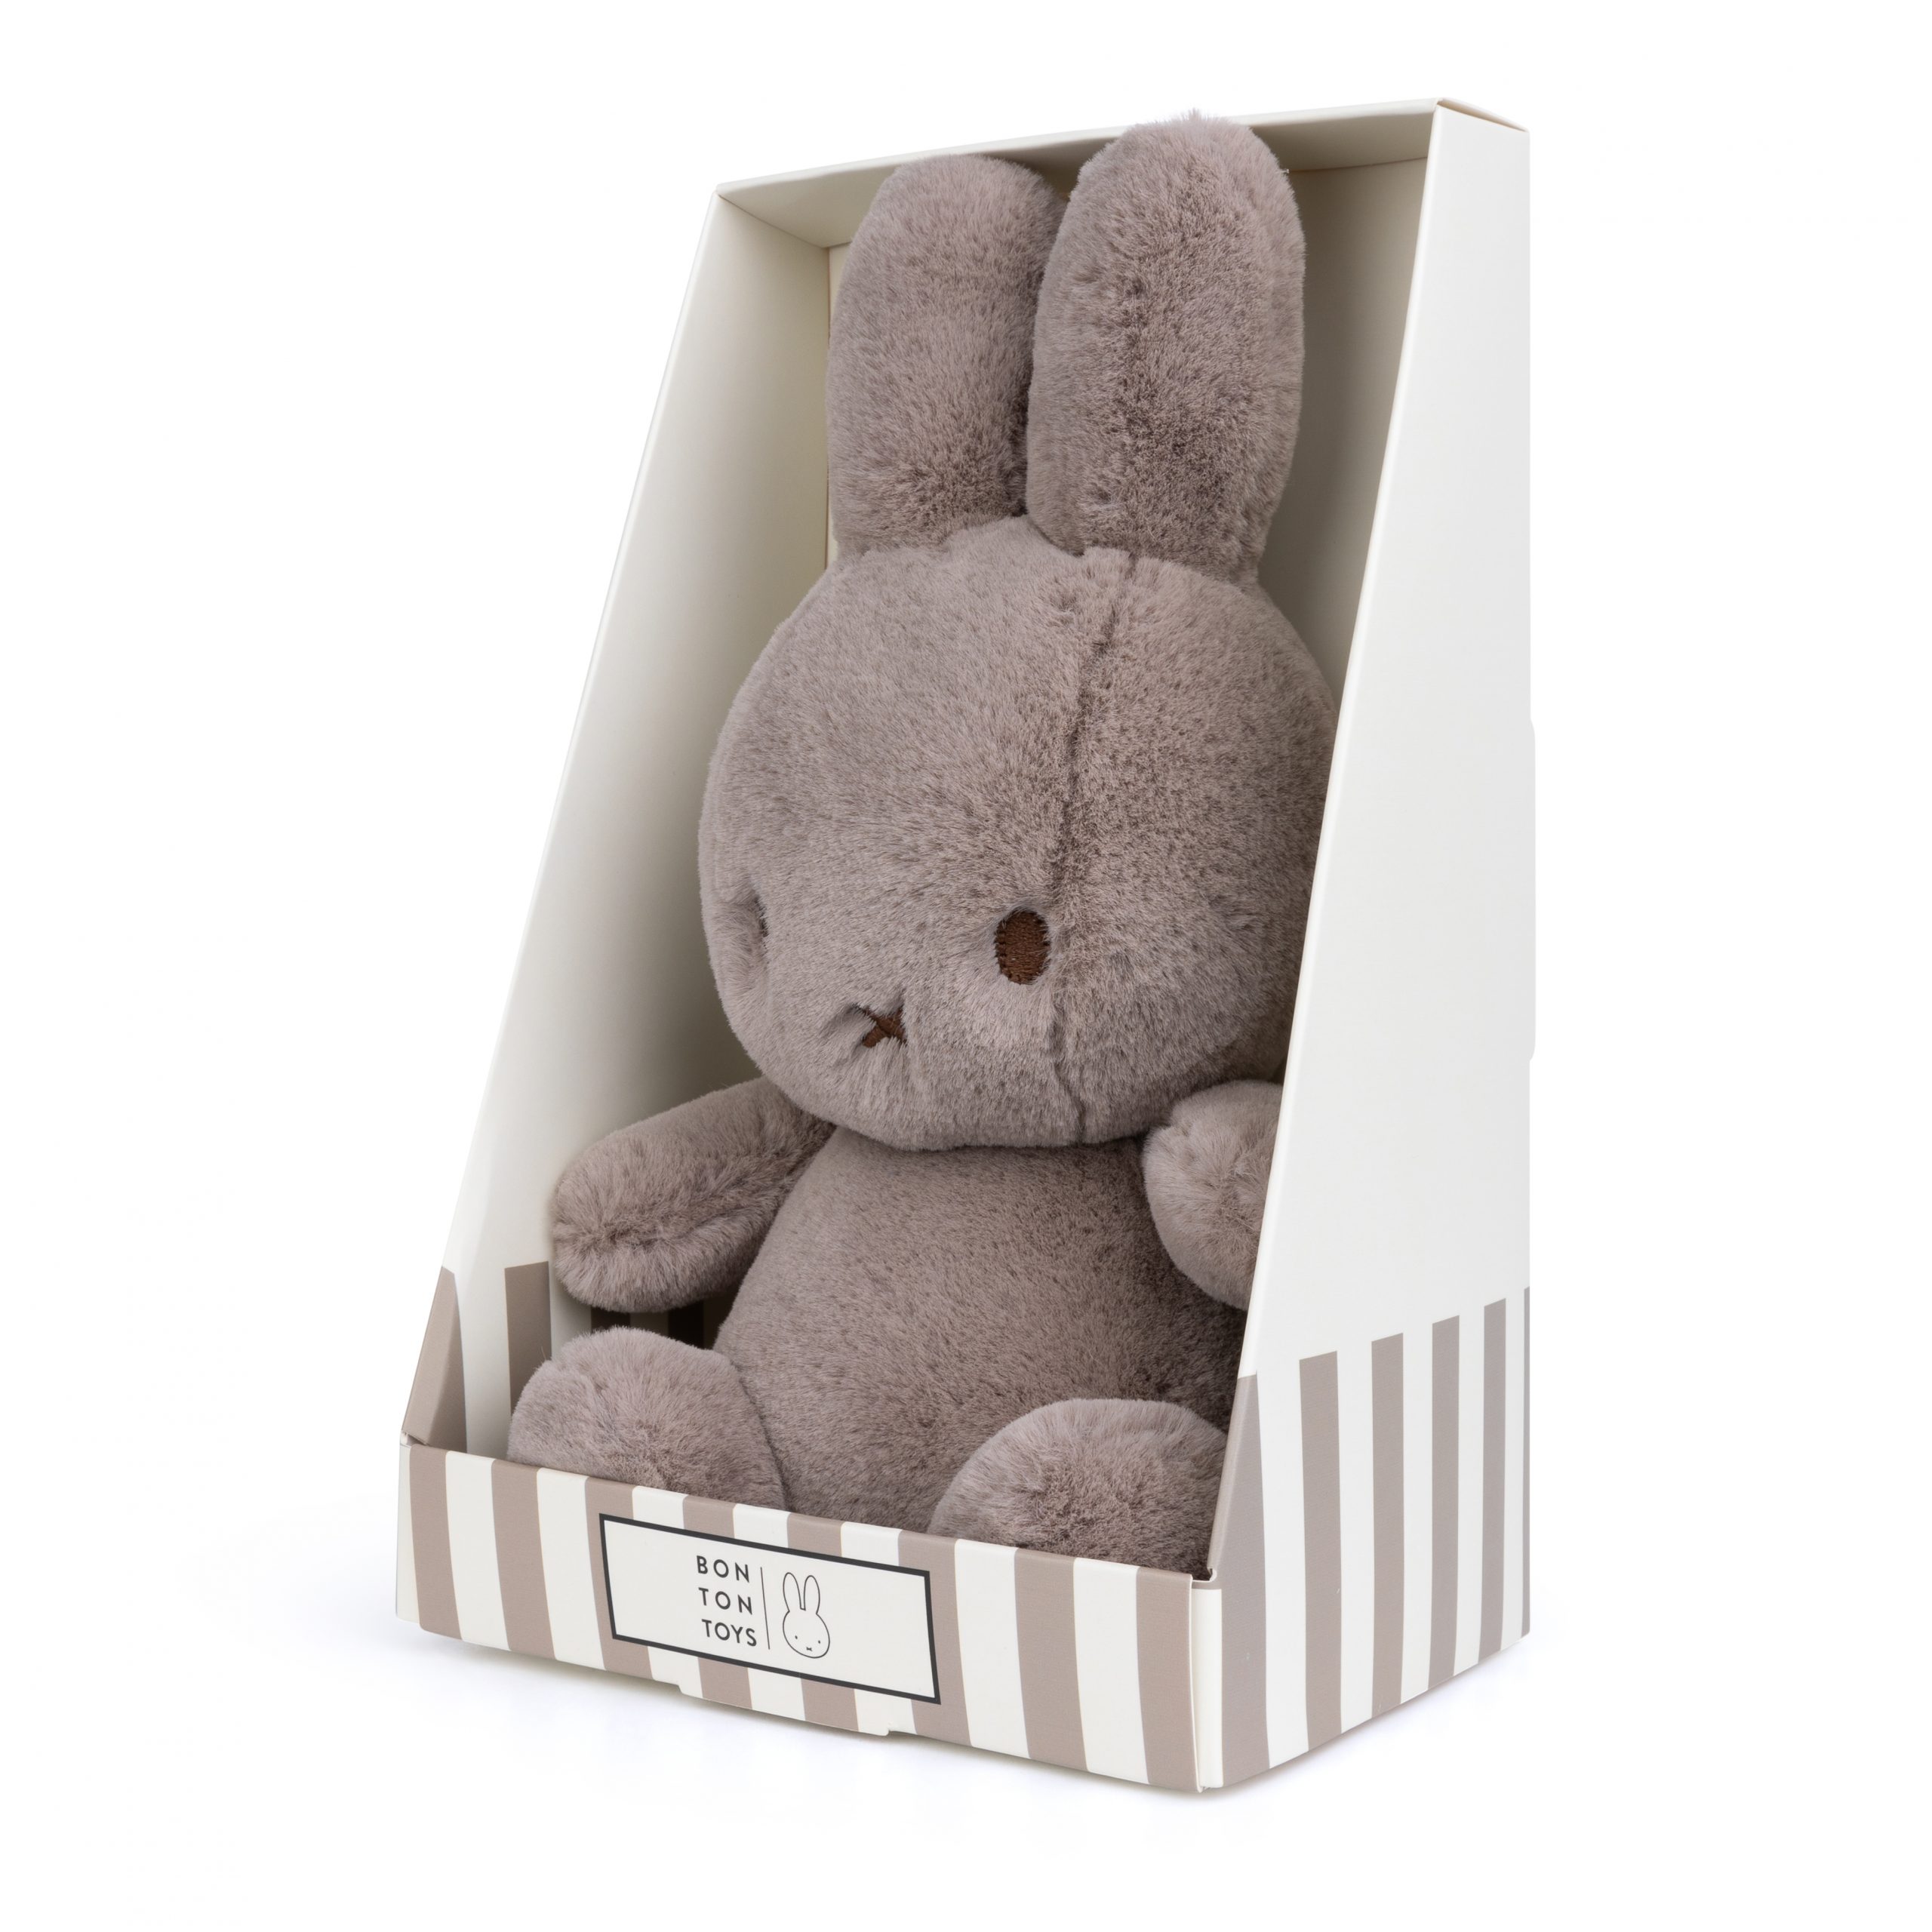 Cozy Miffy Sitting Taupe in giftbox - 23 cm